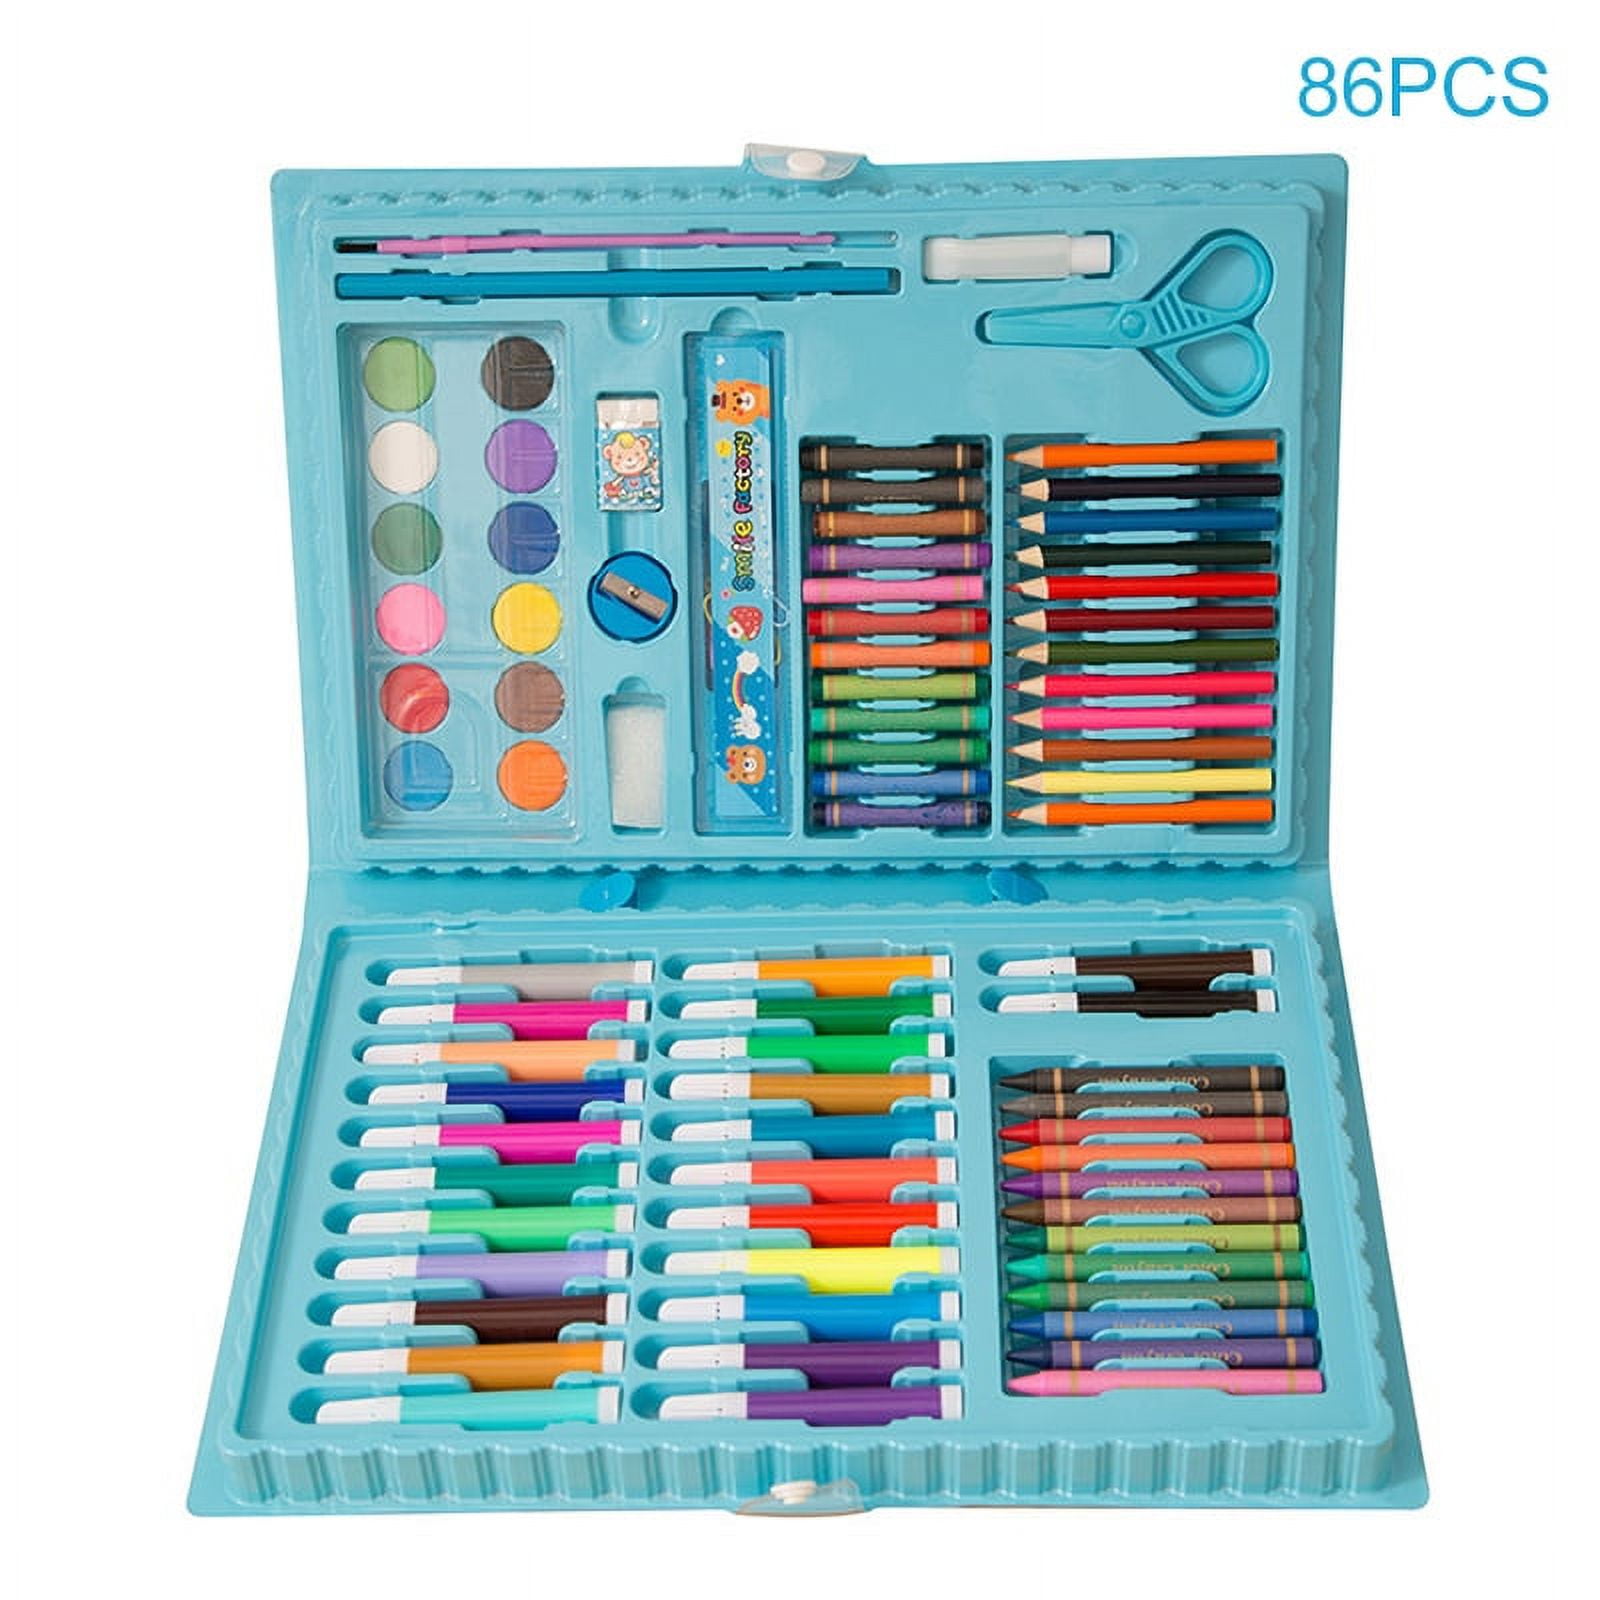 Buy 163 Piece Deluxe Art Supply Set (Coloring Pencils, Crayons, Oil  Pastels, Markers, Water Paint, Eraser, Pencil, Sharpener, Liquid Glue and  White Glue) at ShopLC.